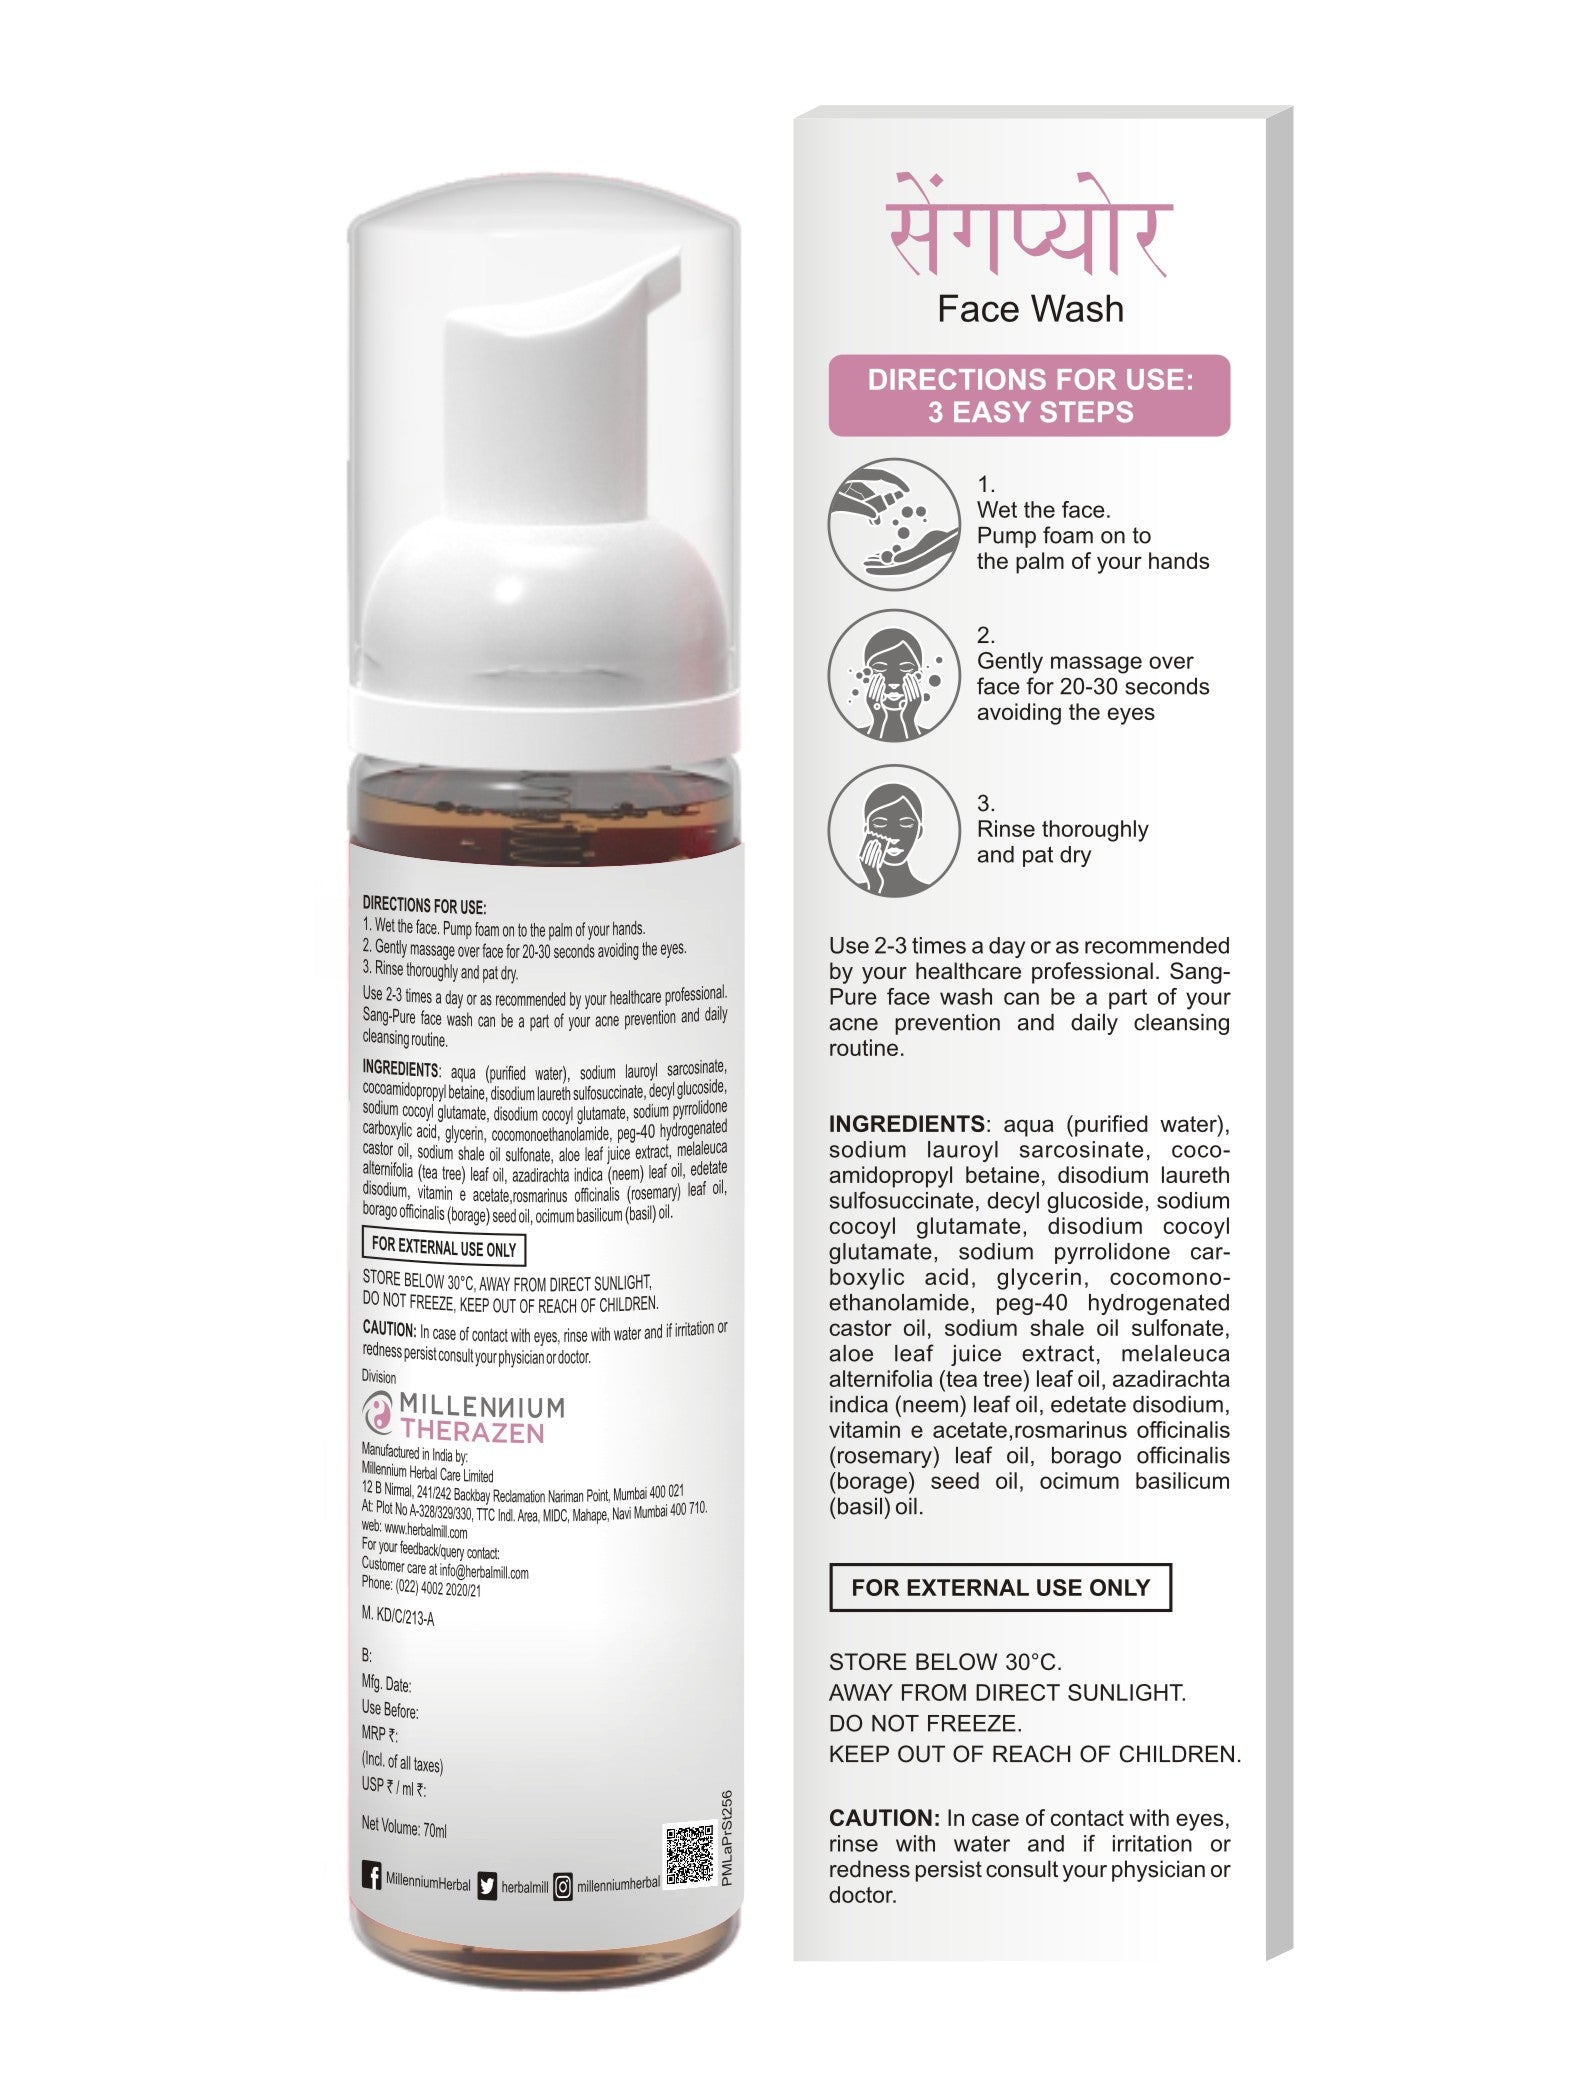 Back of the pack of Sang-pure face wash